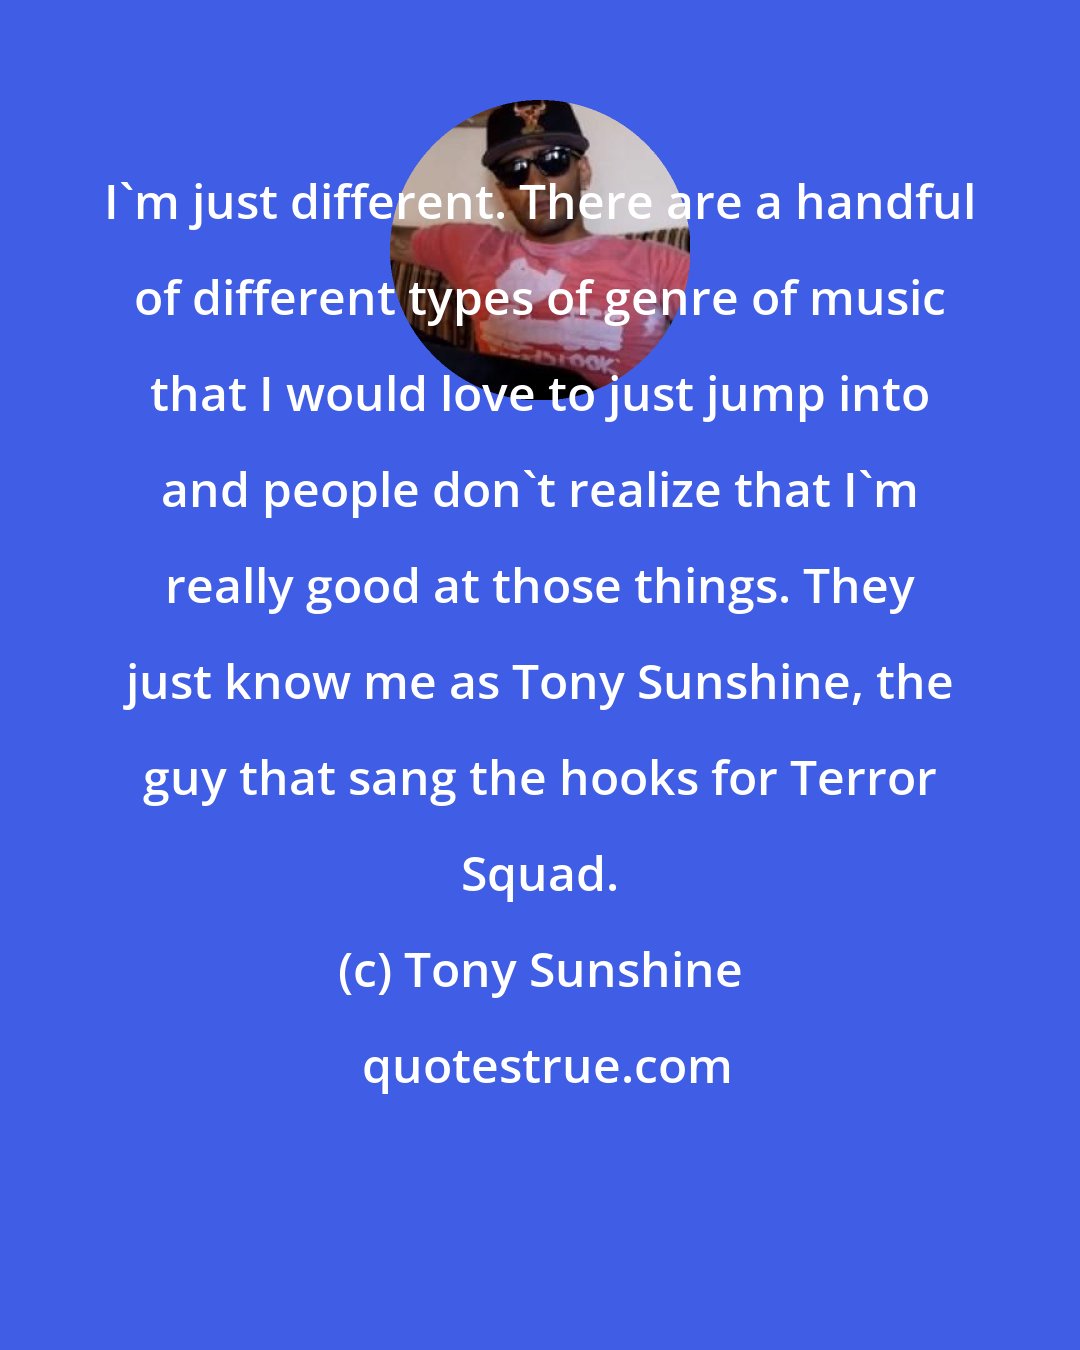 Tony Sunshine: I'm just different. There are a handful of different types of genre of music that I would love to just jump into and people don't realize that I'm really good at those things. They just know me as Tony Sunshine, the guy that sang the hooks for Terror Squad.